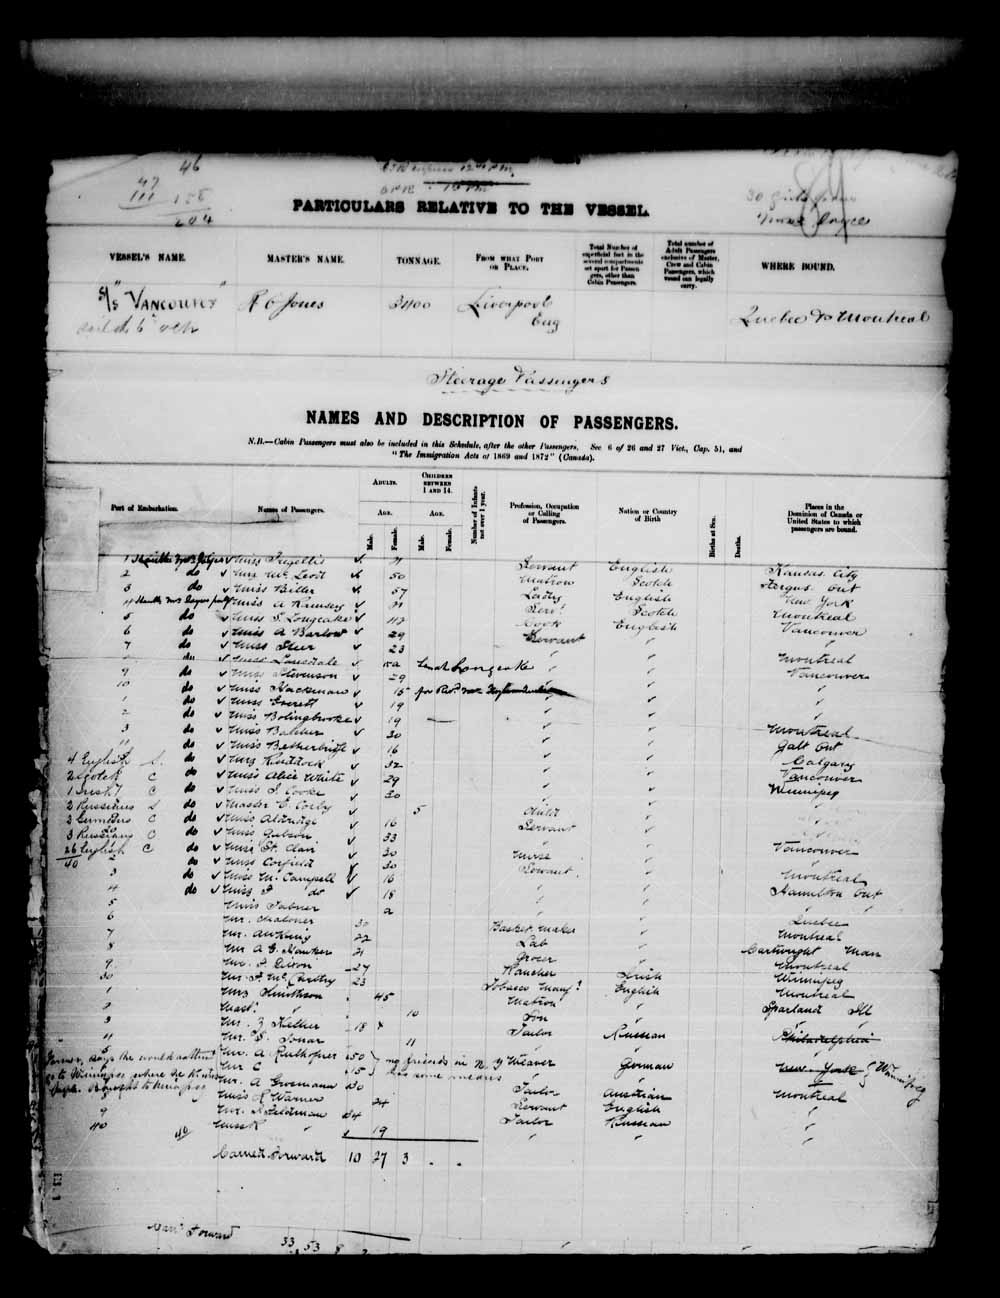 Digitized page of Passenger Lists for Image No.: e003555389